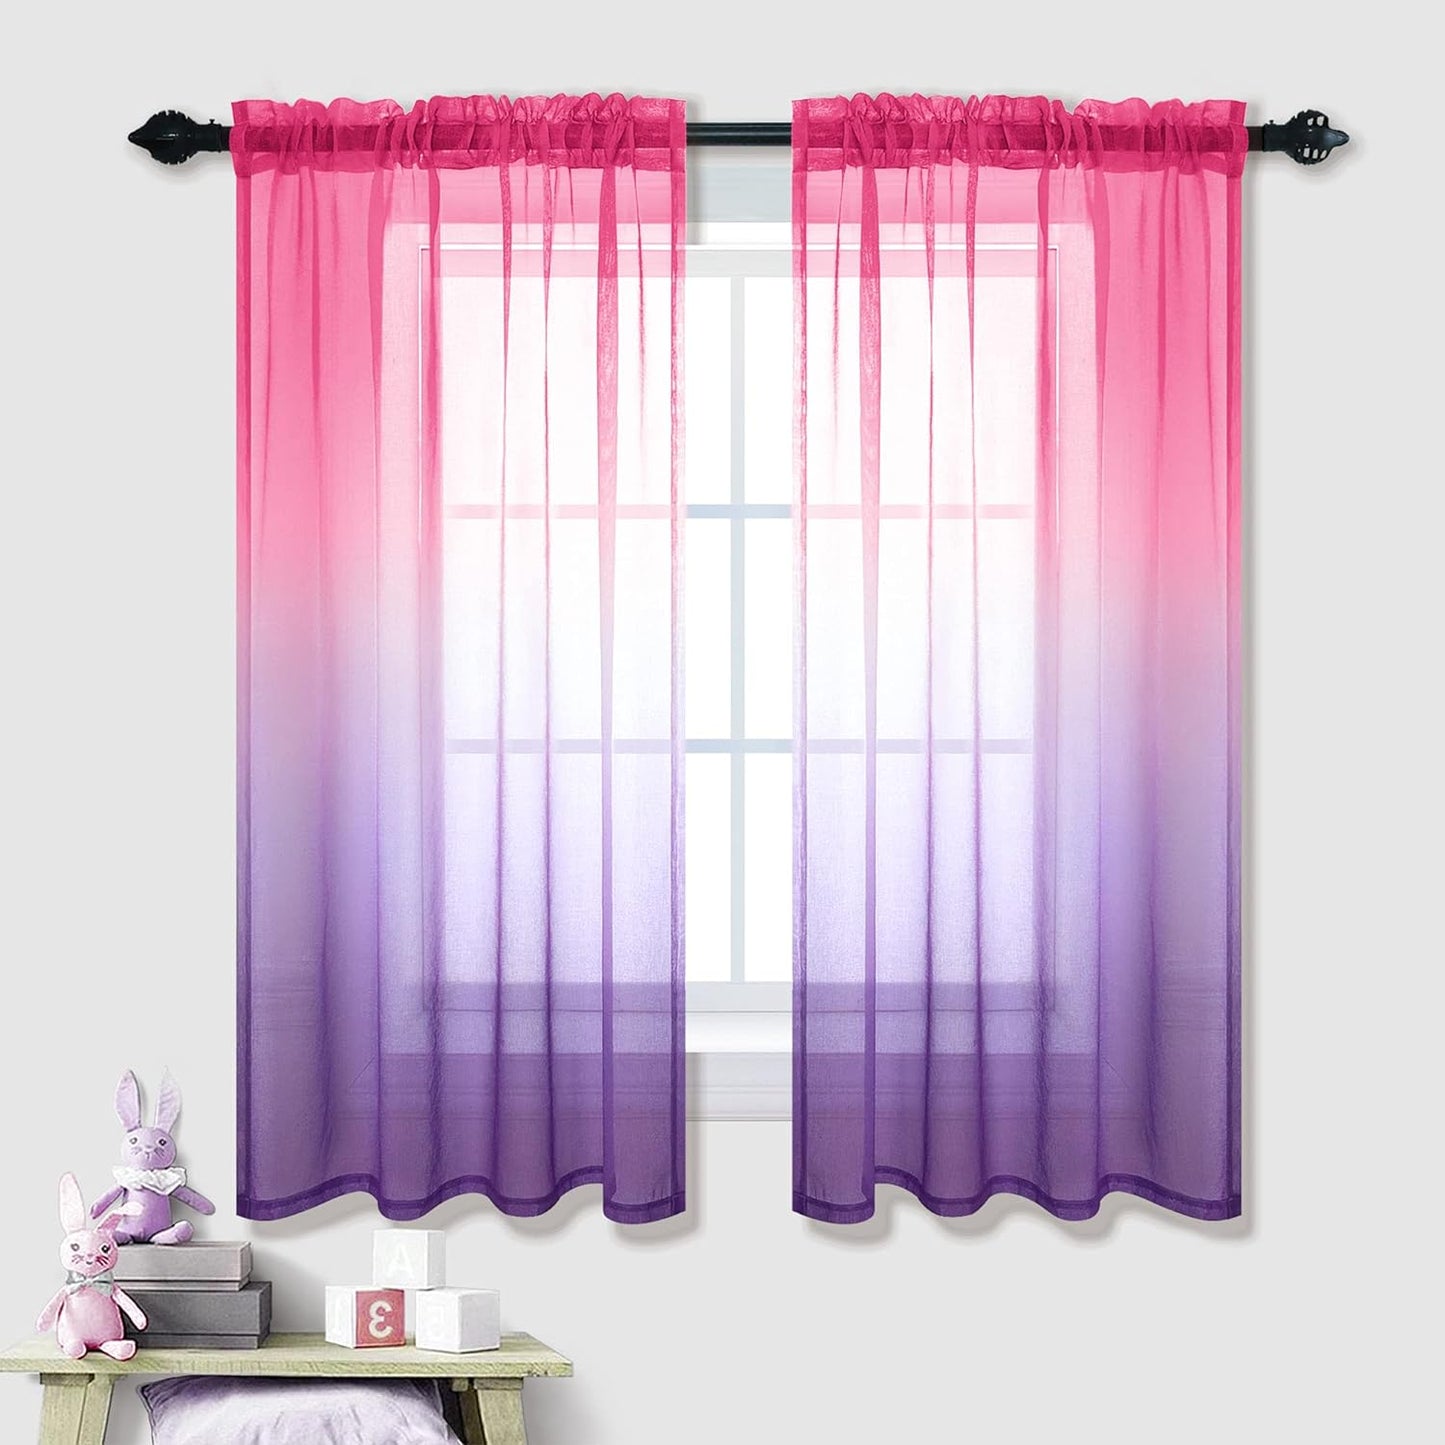 Spring Sheer Curtains for Living Room with Rod Pocket Window Treatments Decor 84 Inch Length Bedroom Curtain Set of 2 Panels Yellow and Grey Gray  PITALK TEXTILE Pink And Purple 42X45 